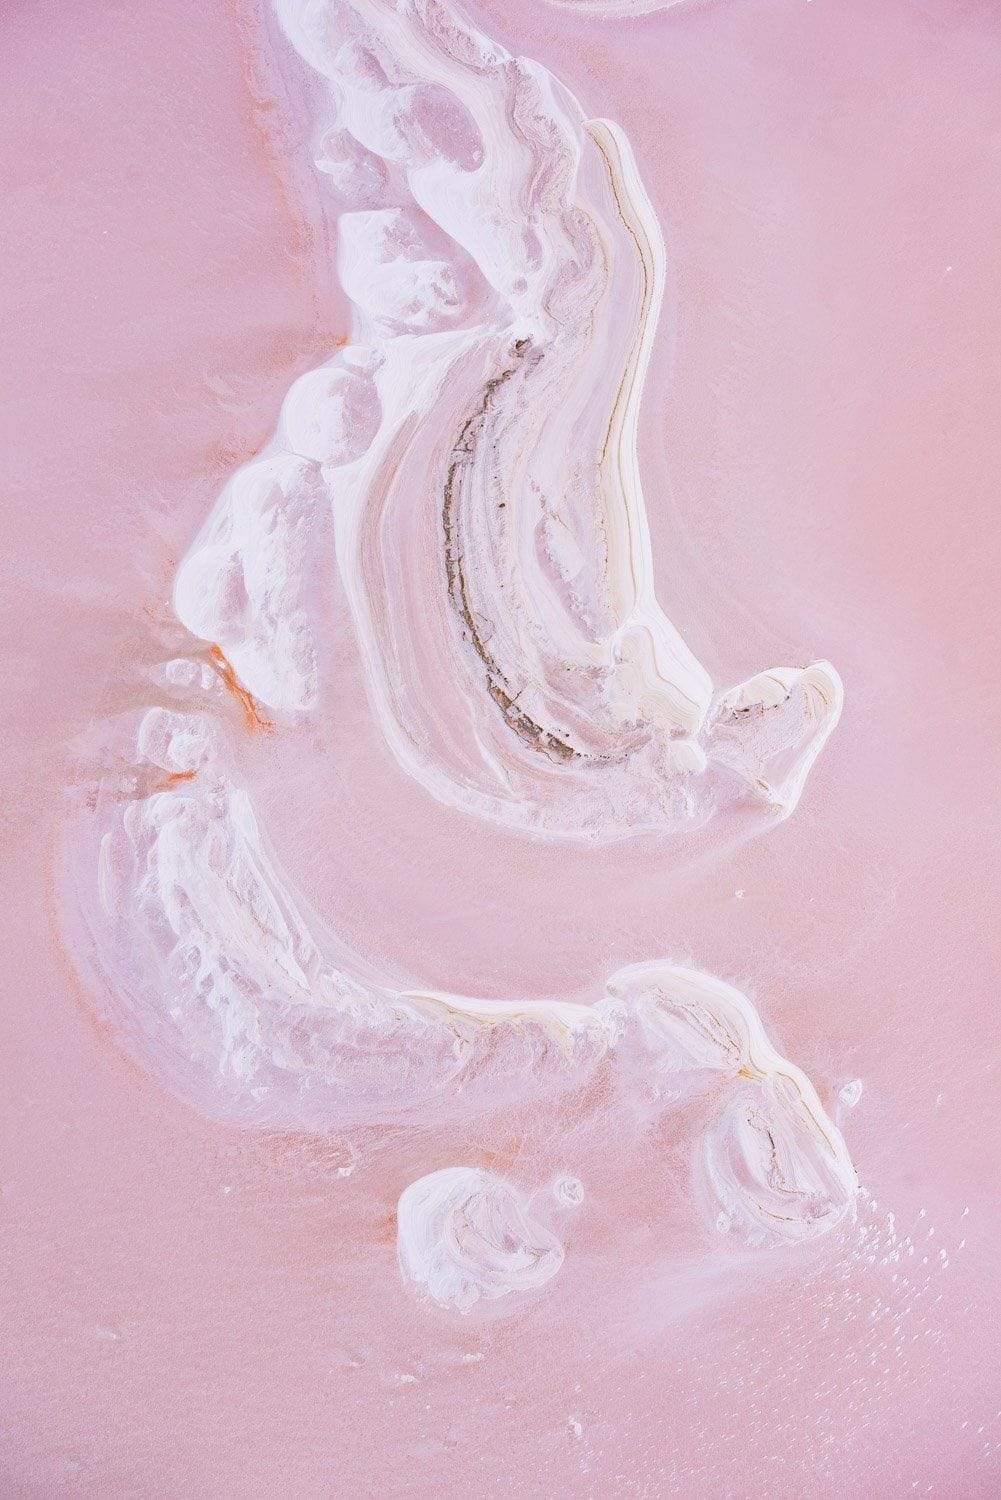 A white womb texture on a lite pink surface, Nature's Womb